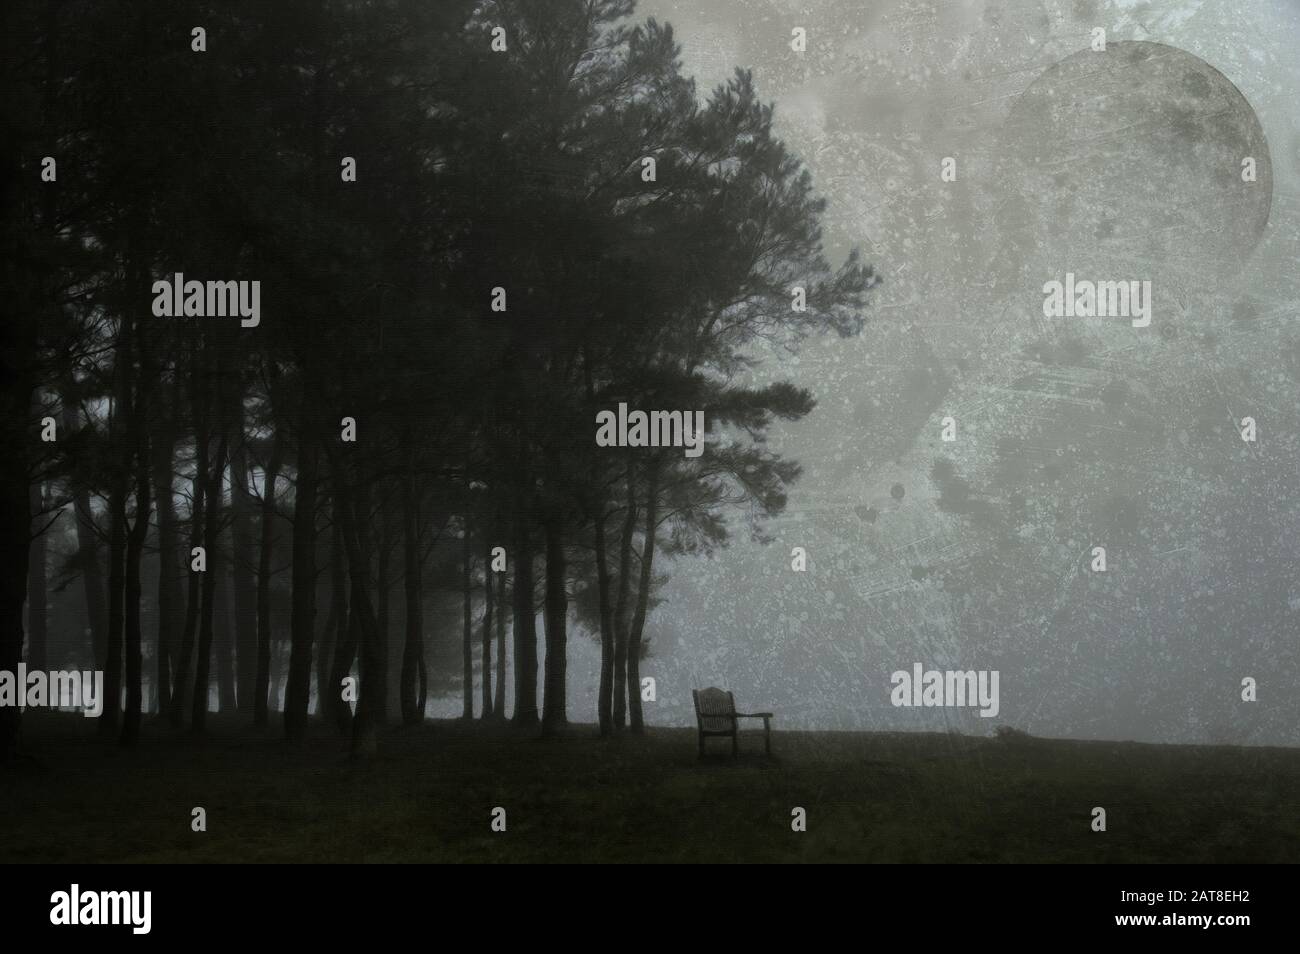 A bench on the edge of a spooky forest with the moon in the sky. With a photoshopped, paintly effect. With a grunge, textured edit. Stock Photo